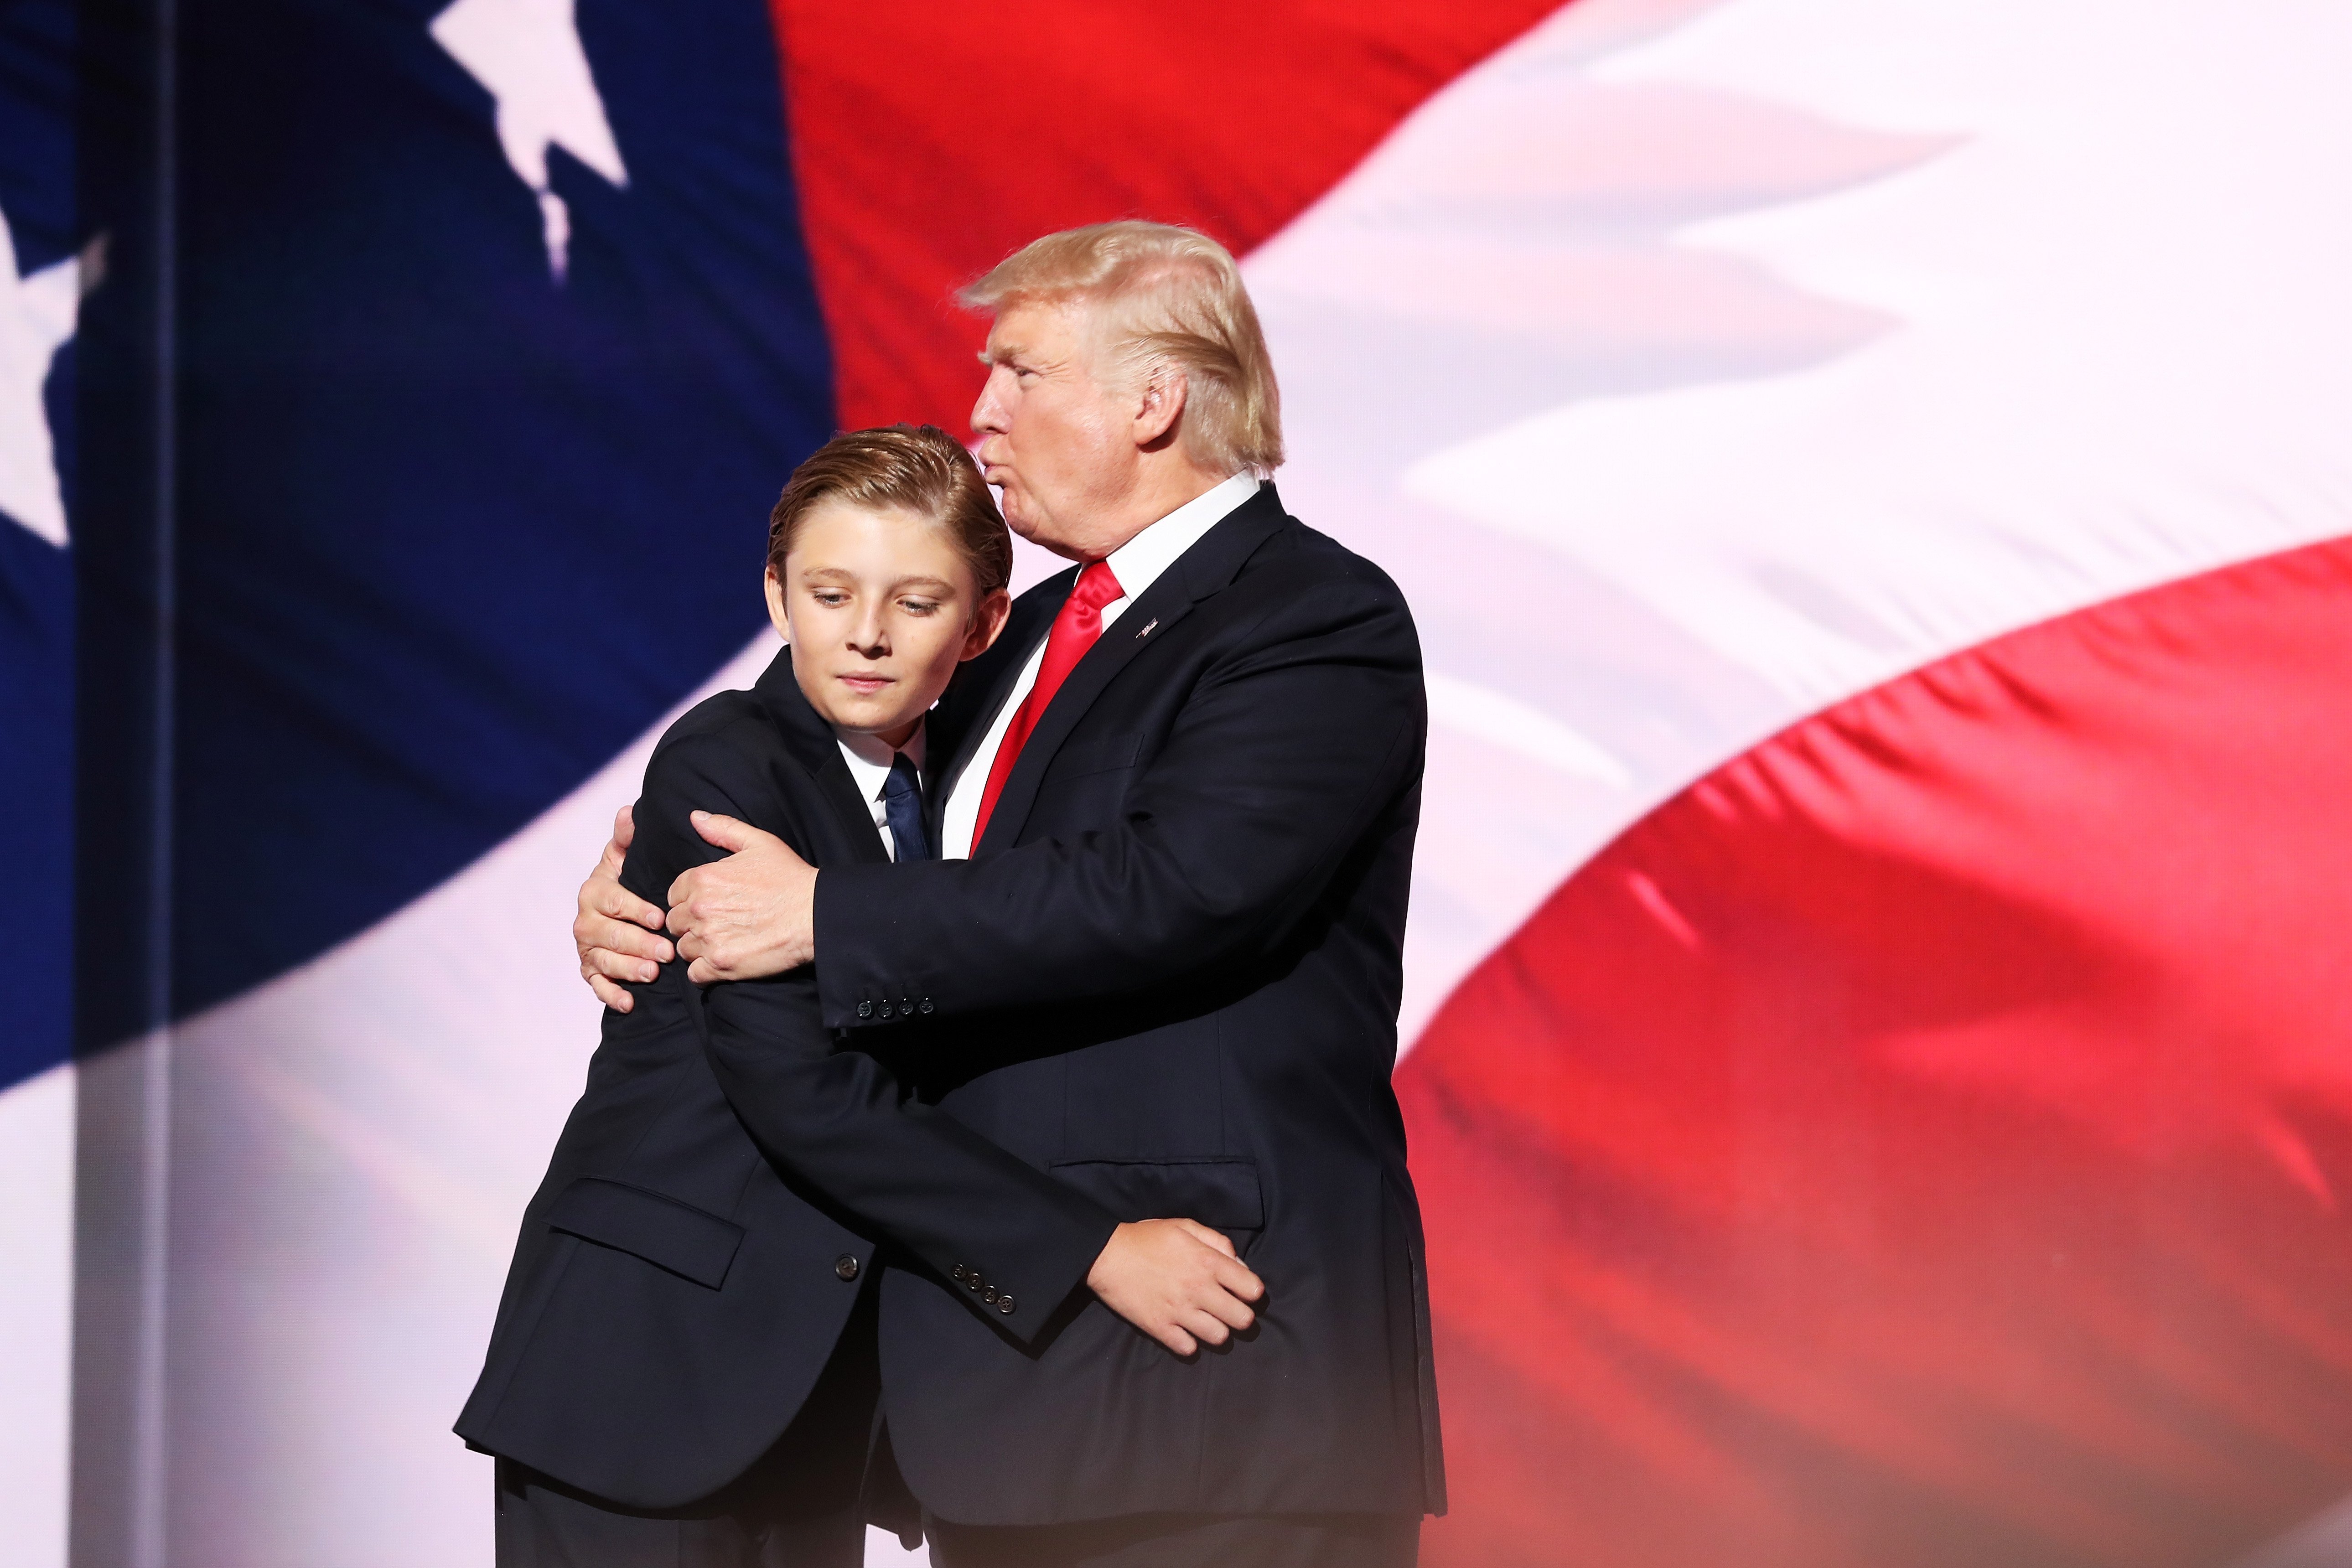 Donald embraces his son Barron Trump after he delivered his speech on the fourth day of the Republican National Convention on July 21, 2016 in Cleveland, Ohio | Photo: GettyImages